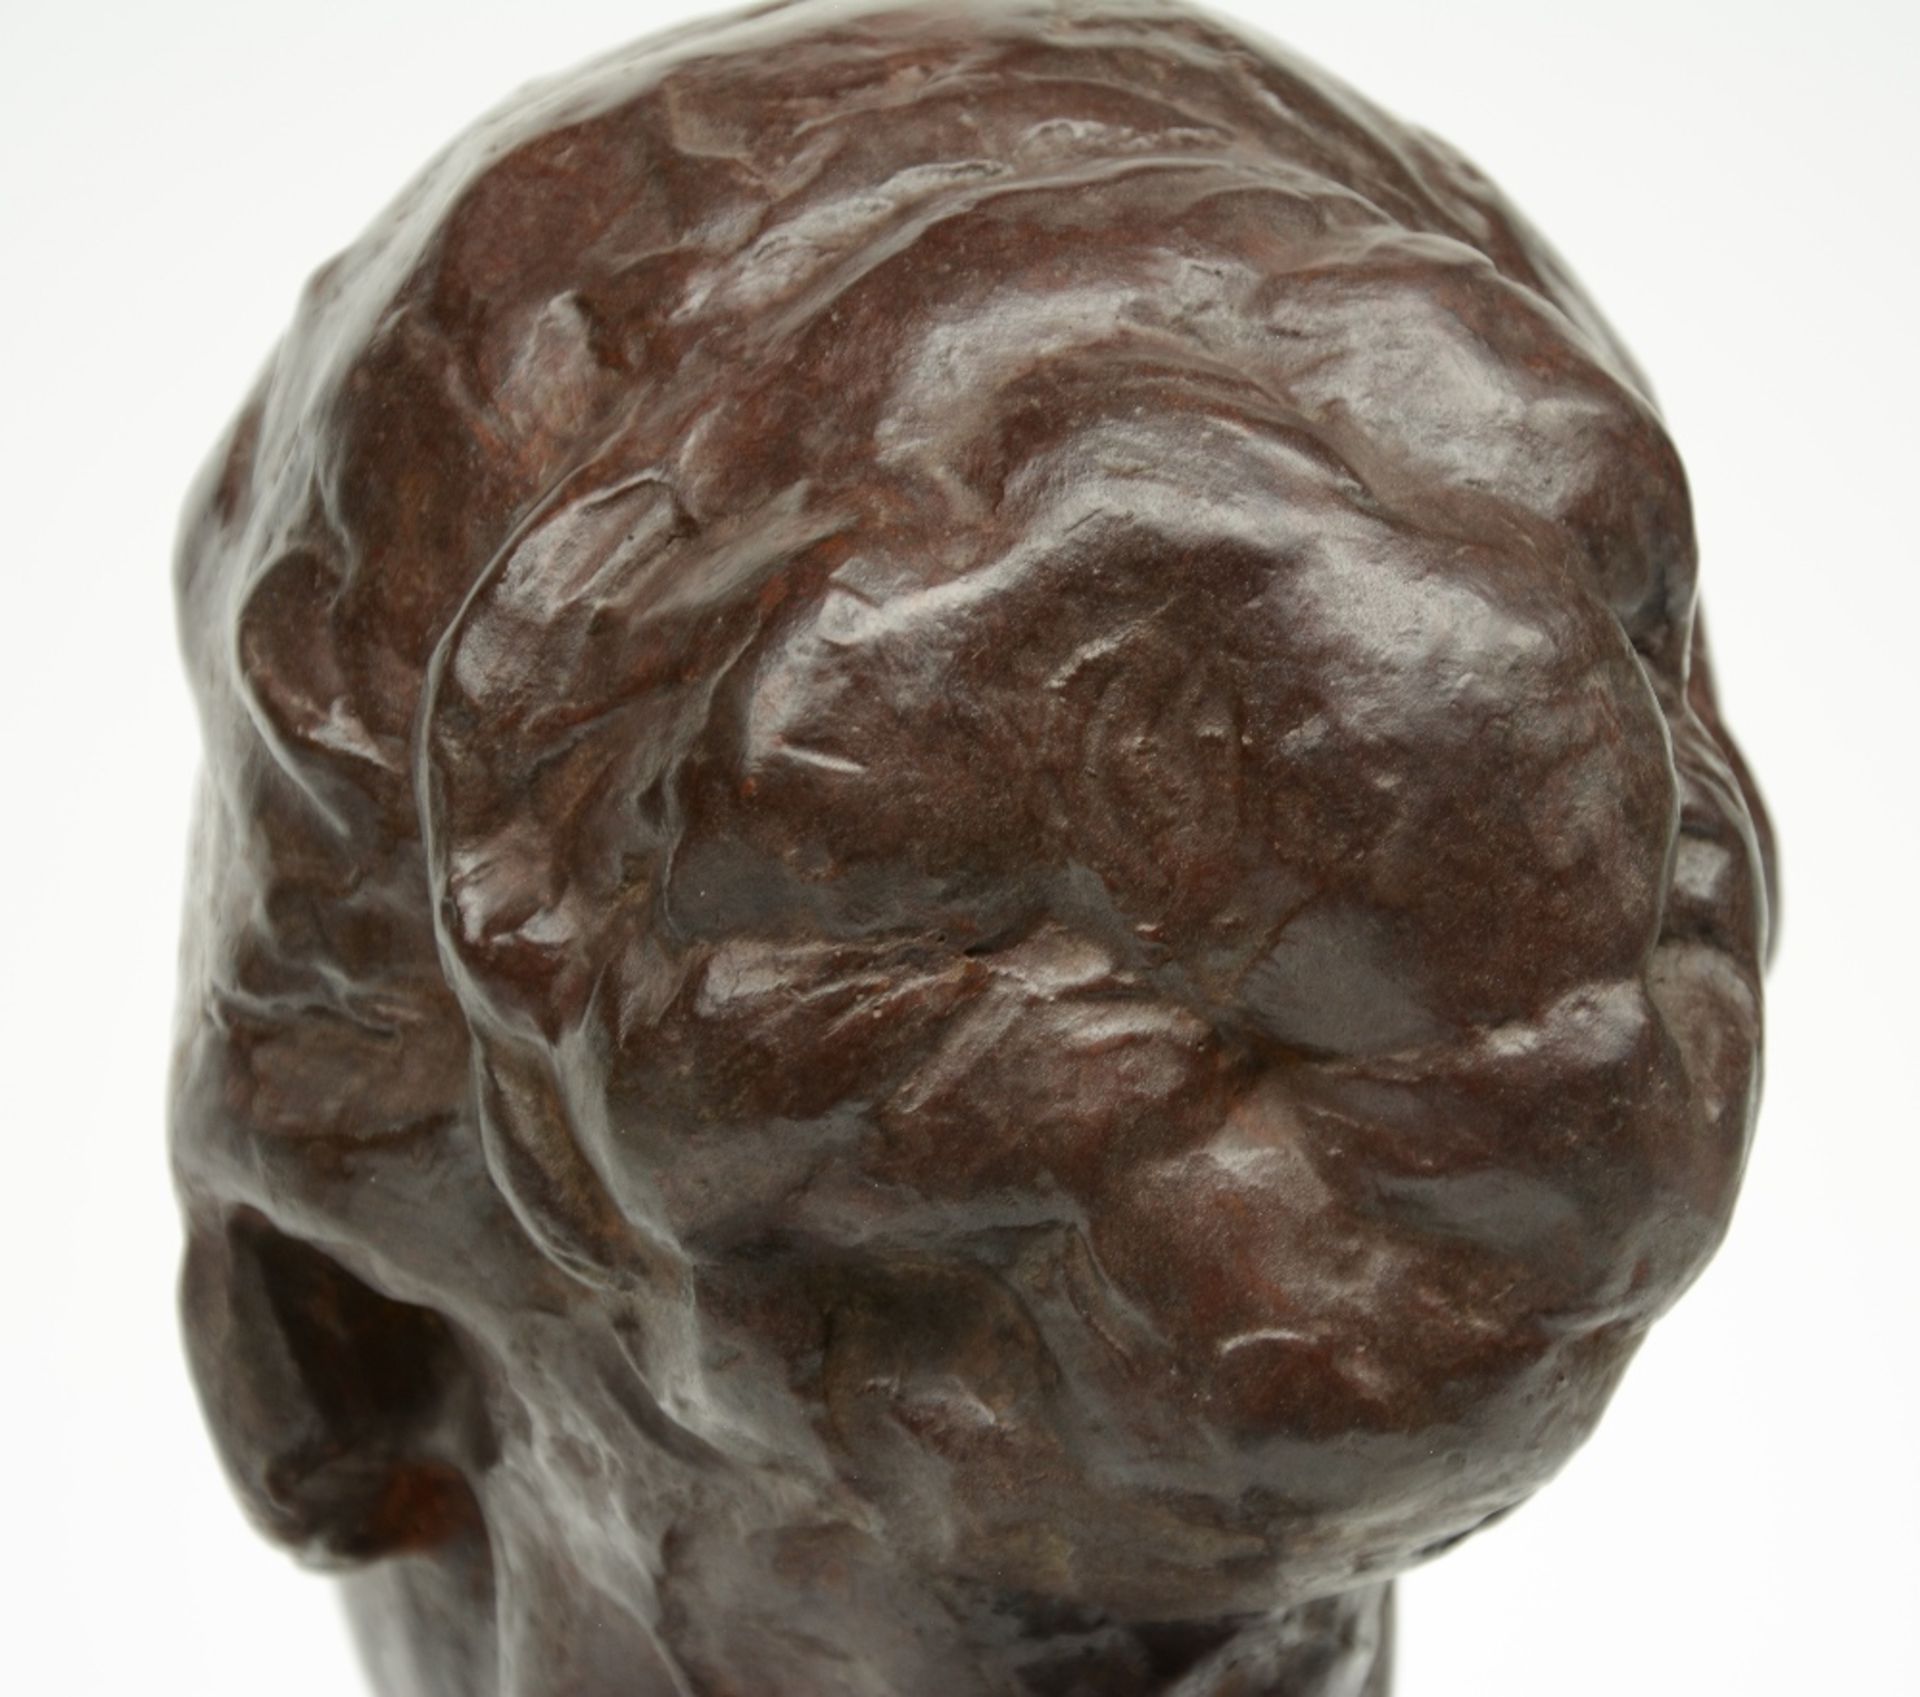 Wouters R., portrait of Nel (Mrs. Wouters), bronze, mounted on granite base, H 40,5 (with base) - - Image 10 of 10